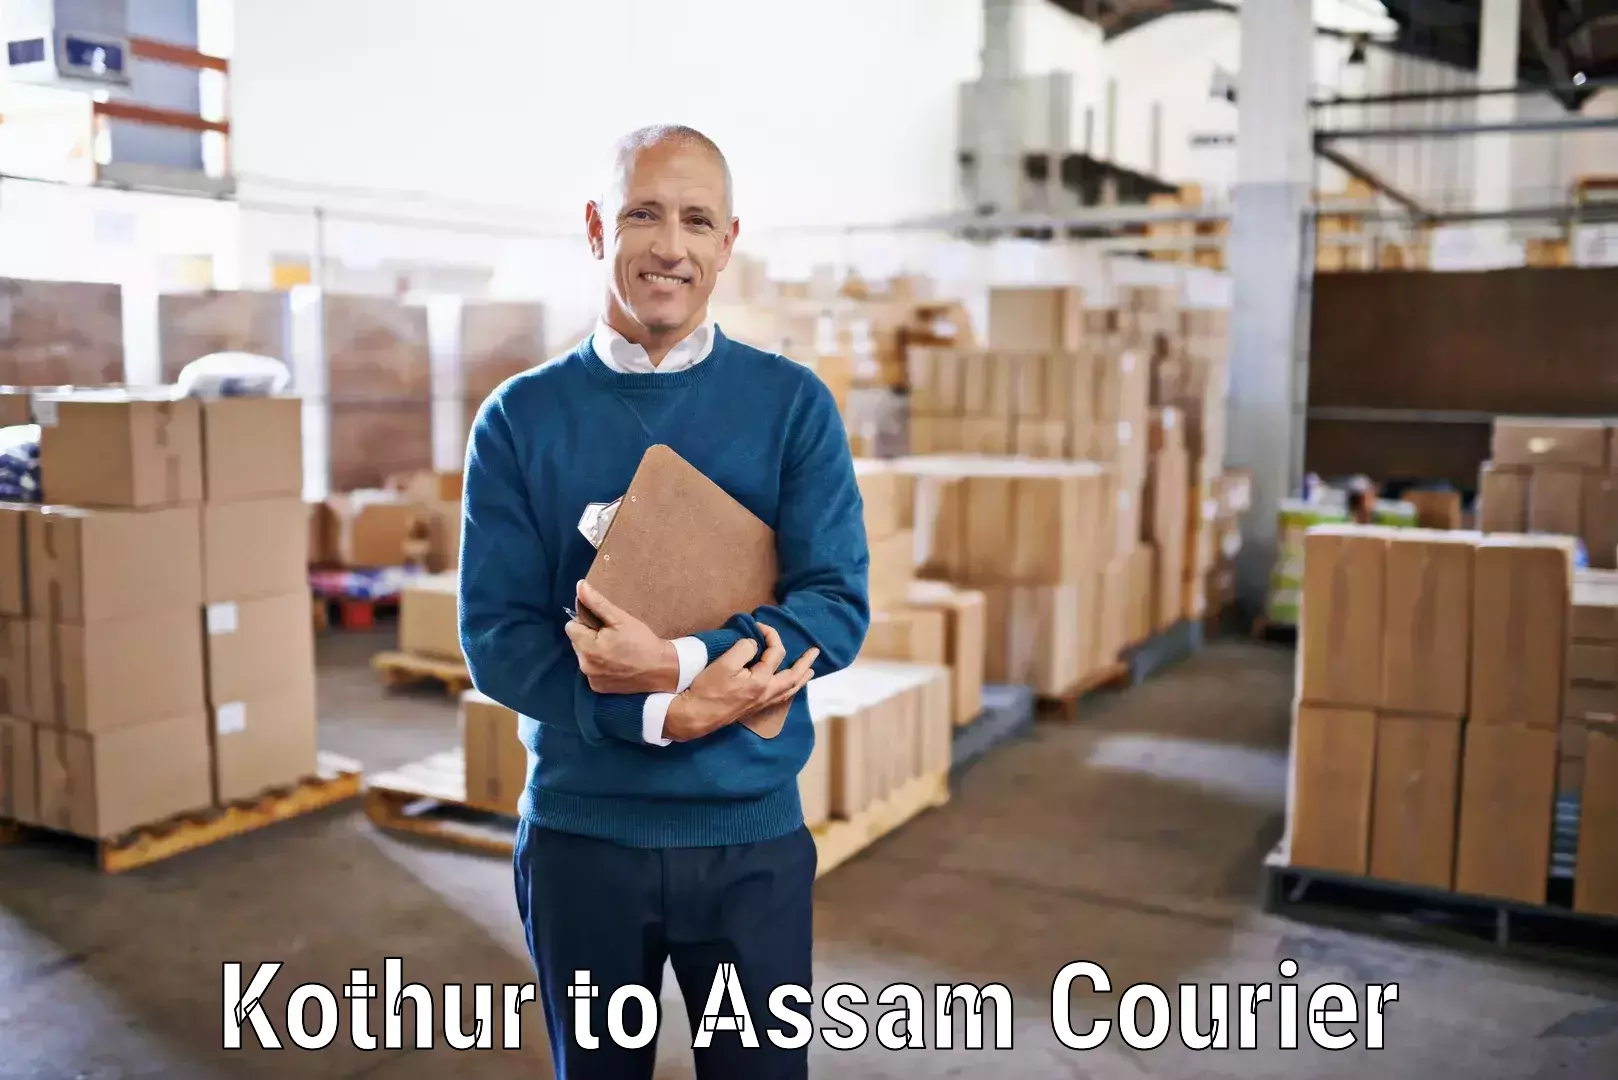 On-call courier service Kothur to Guwahati